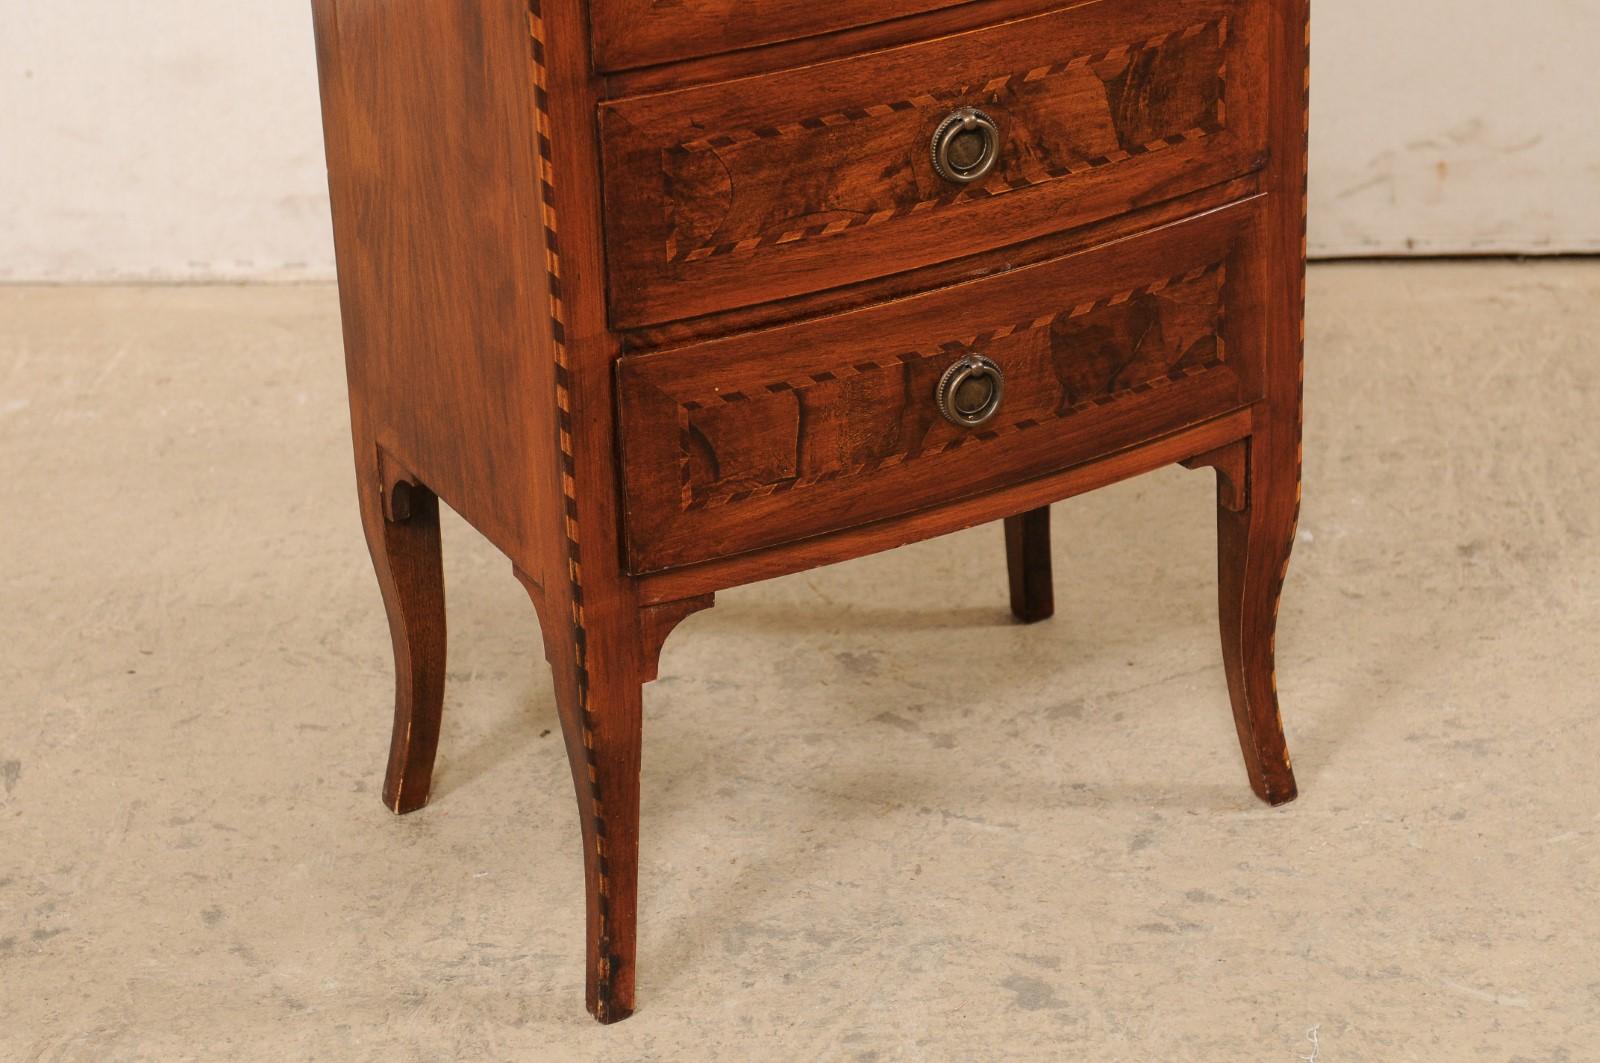 Burl Small Italian Raised Side Chest of Drawers w/Roped Inlay Trimming, Mid-20th C For Sale